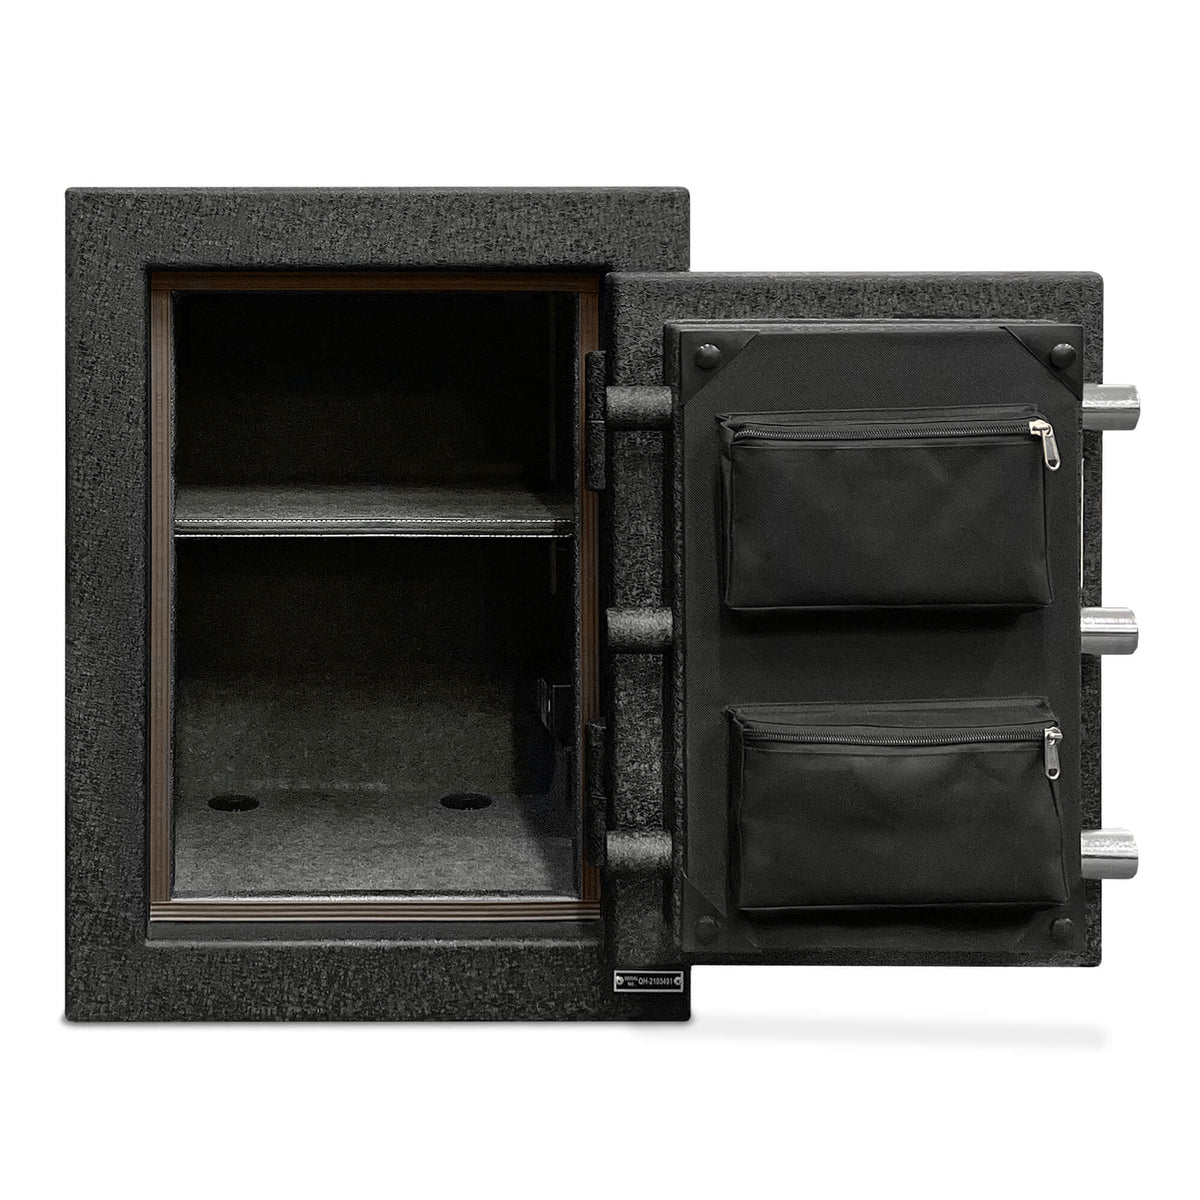 Stealth UL Home and Office Safe HS4